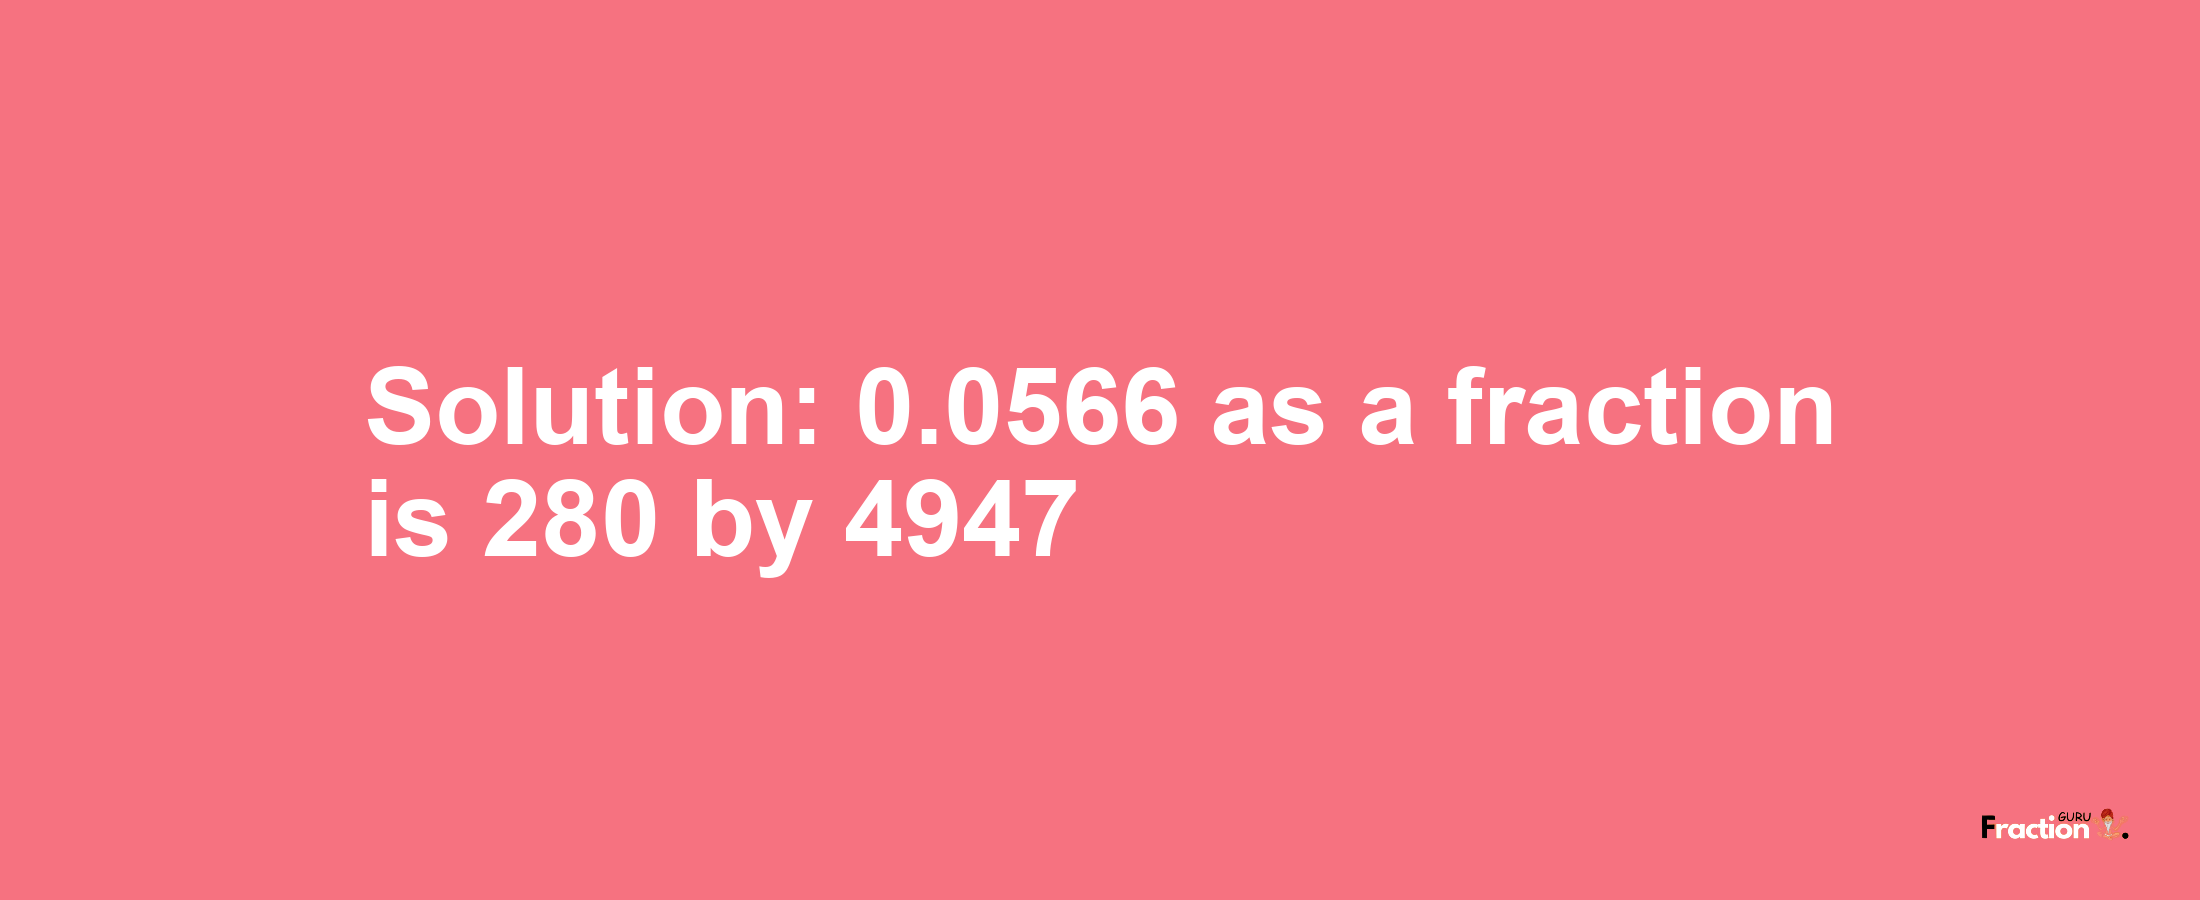 Solution:0.0566 as a fraction is 280/4947